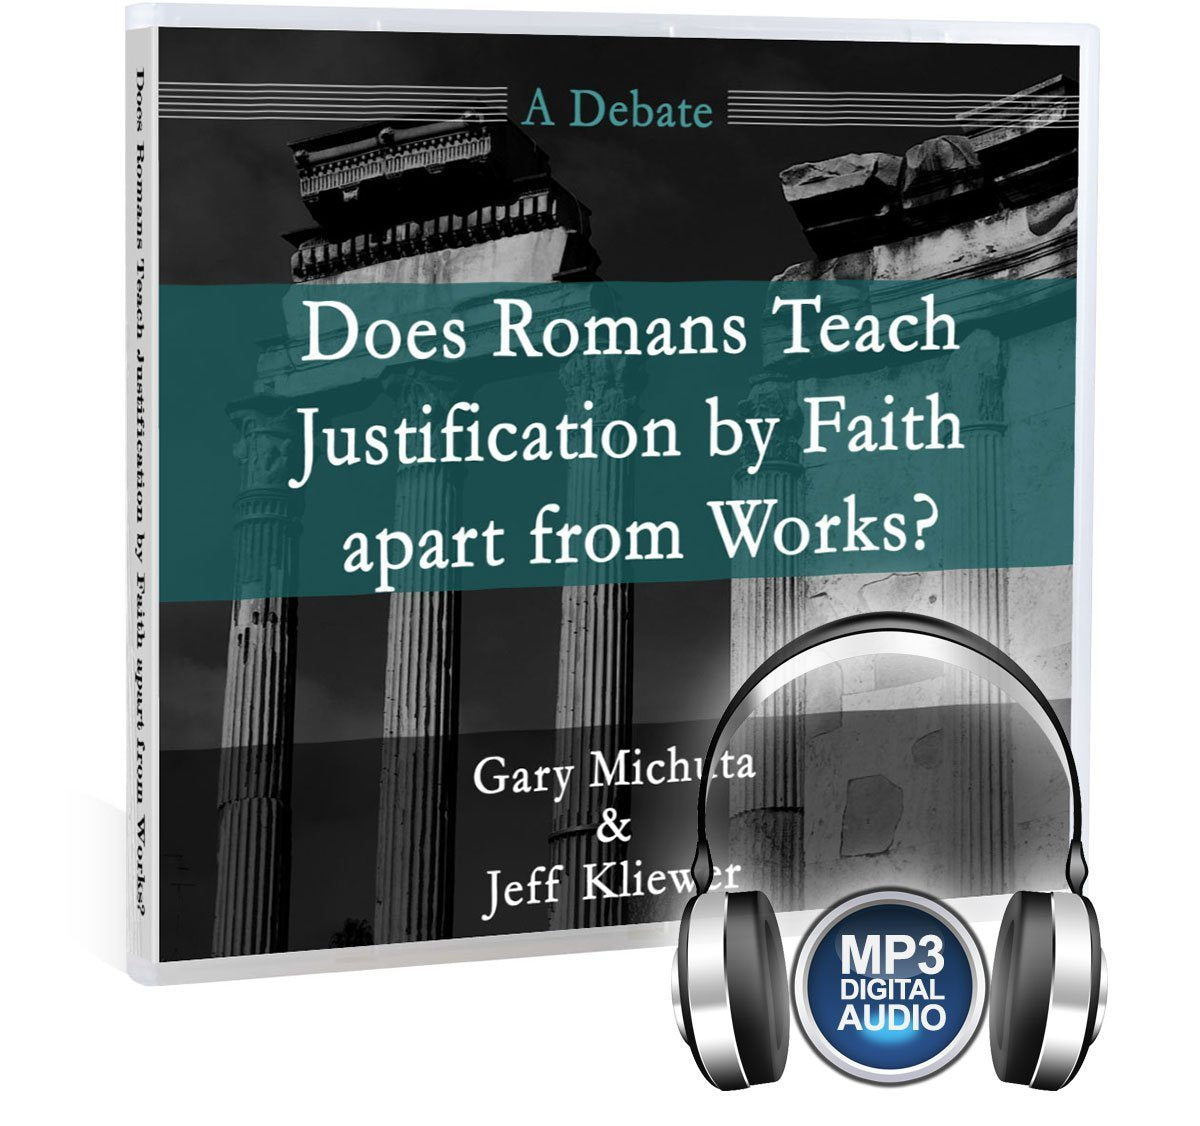 A debate on whether or not the Book of Romans teach justification by faith alone CD